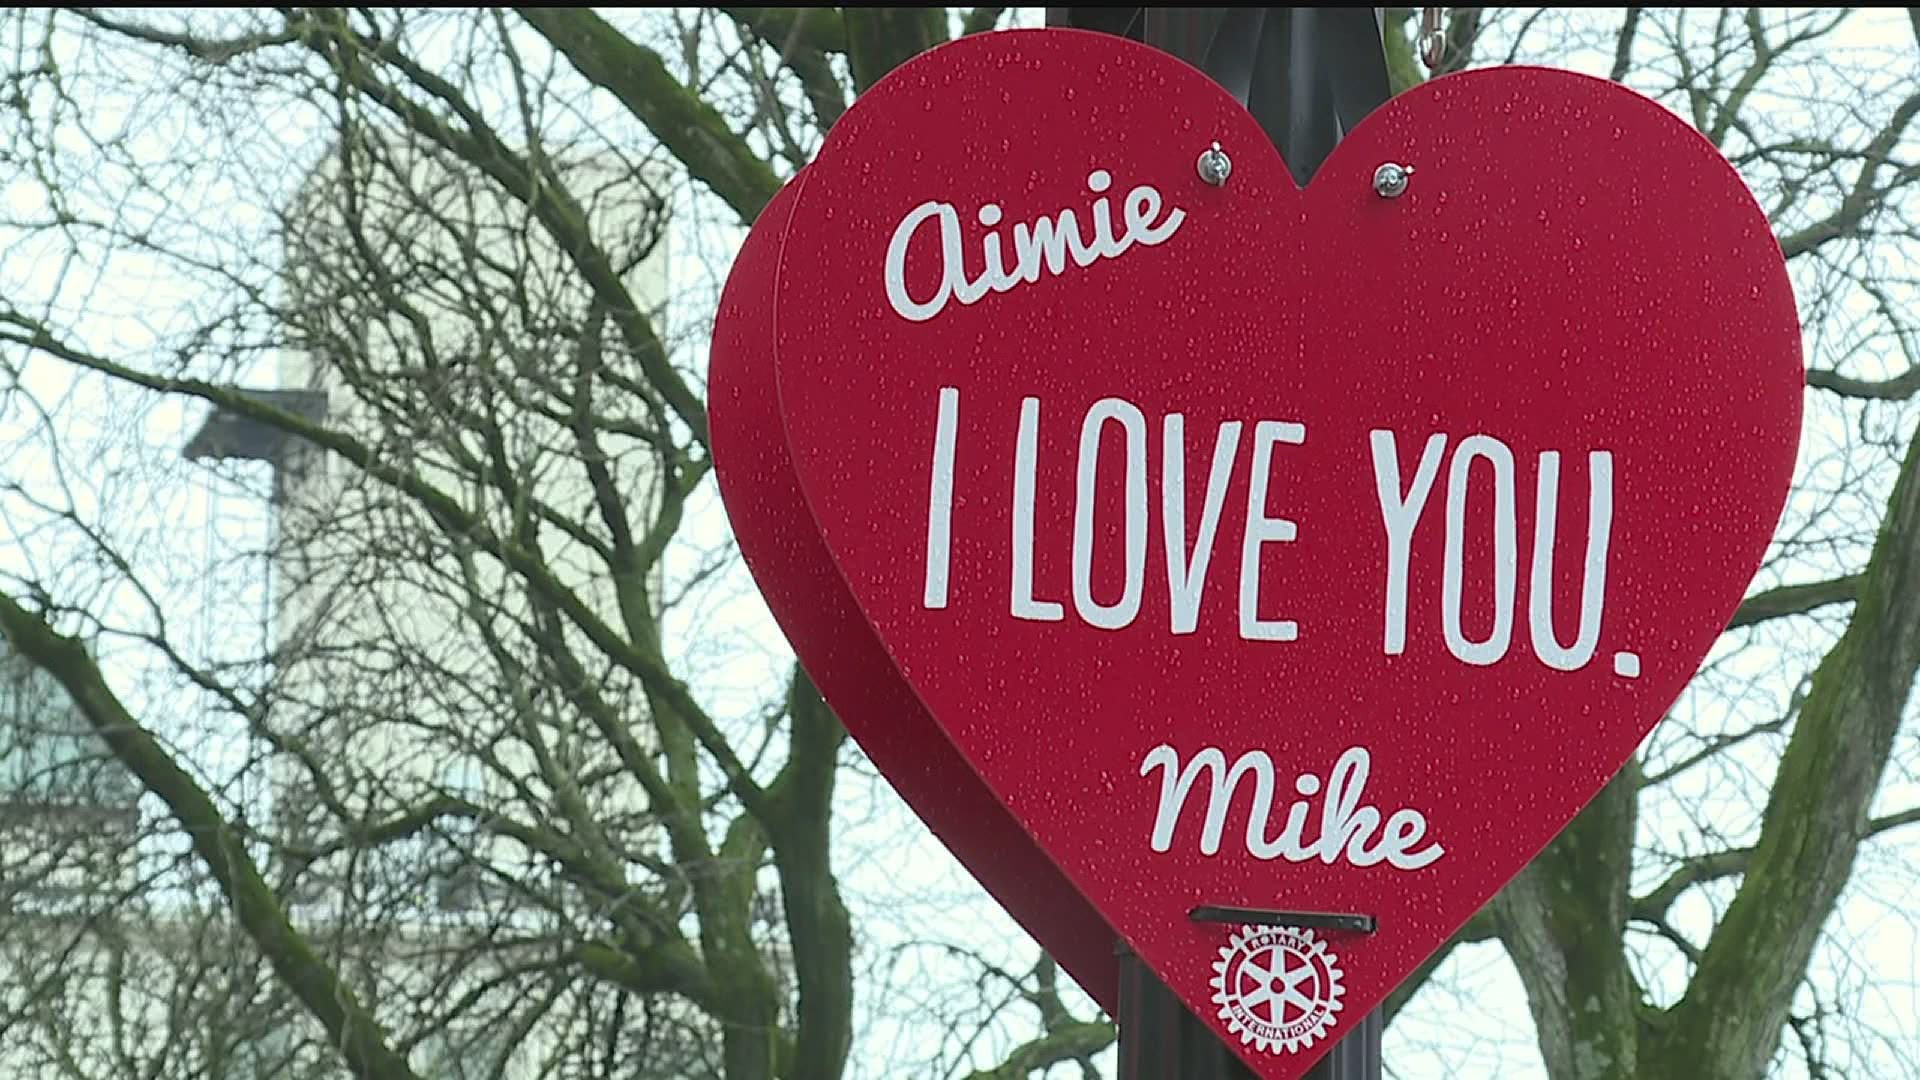 Rotary Club allows Lancaster lovers to publicly share their feelings